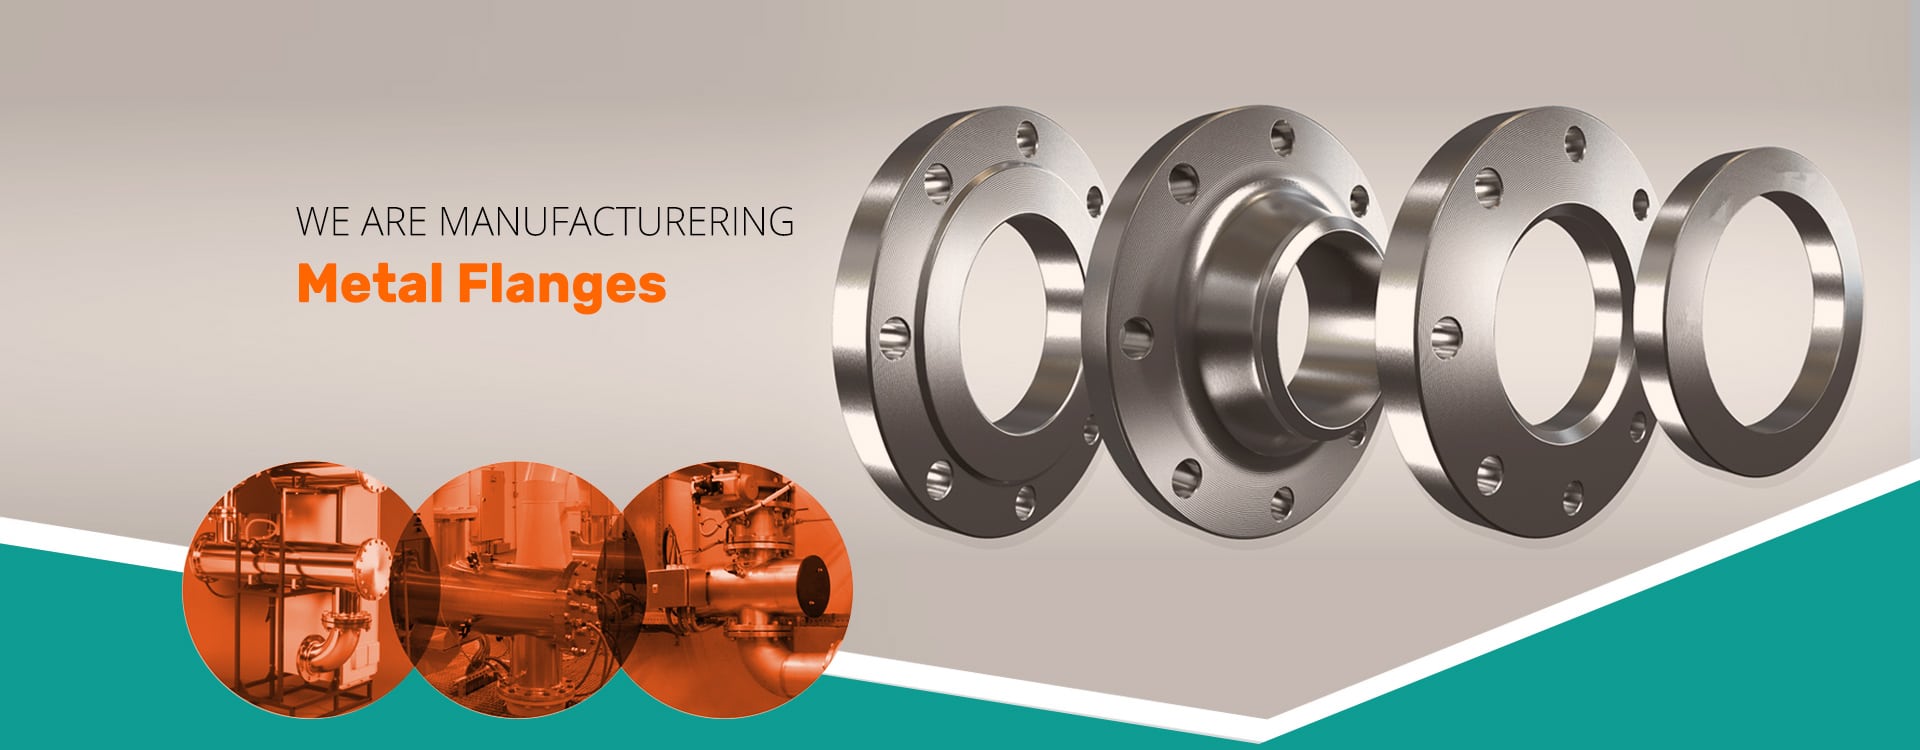 We are Manufacturer of Metel Flanges India